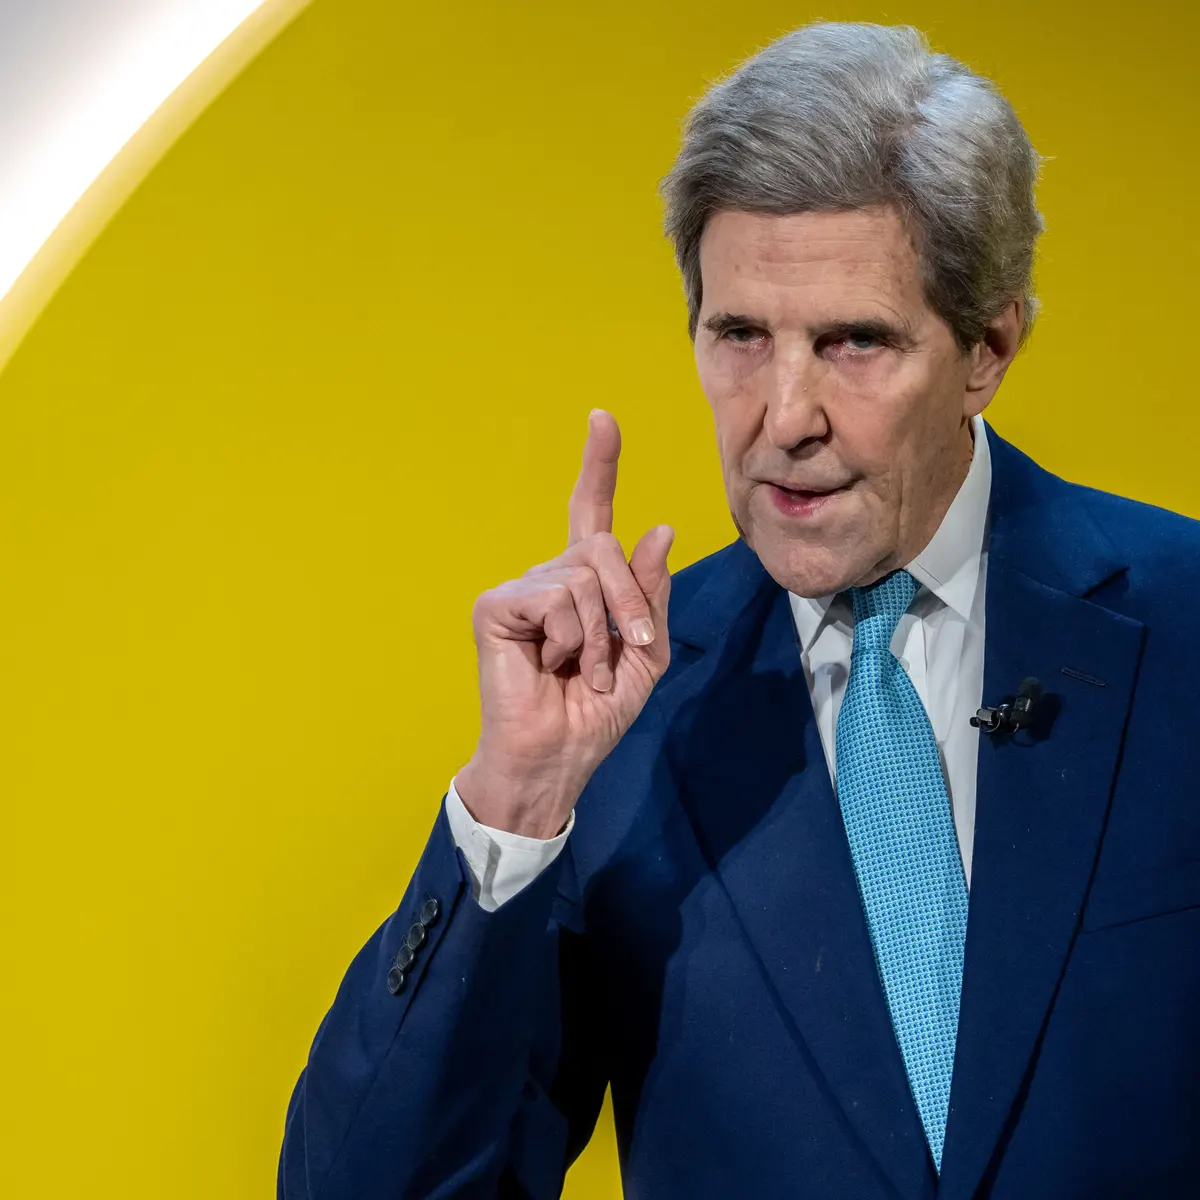 John Kerry’s Assault on Private Property Rights